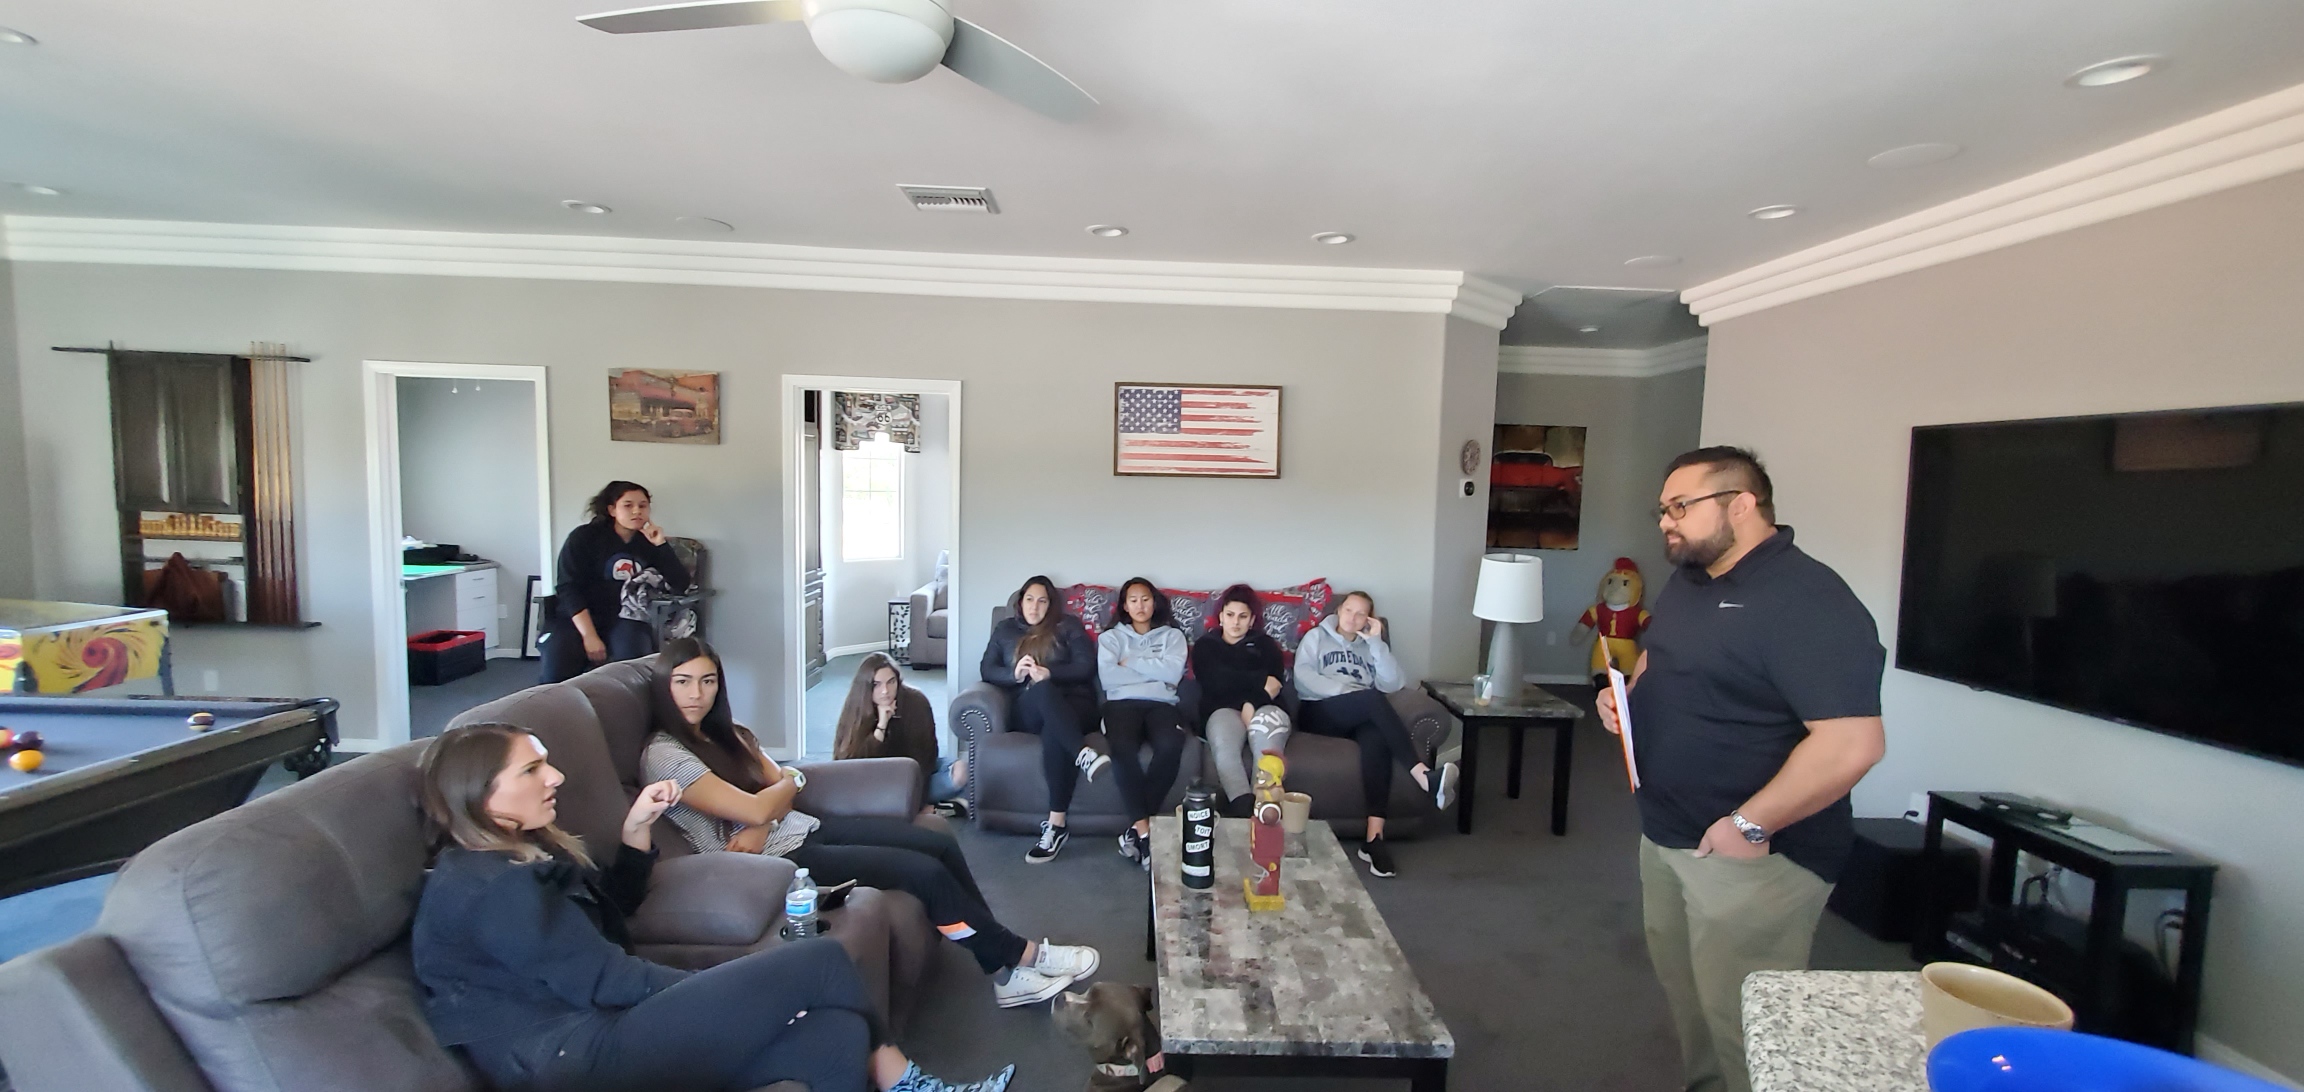 Dr. Jason von Stietz stands in a living room filled with female soccer players and discusses sport psychology